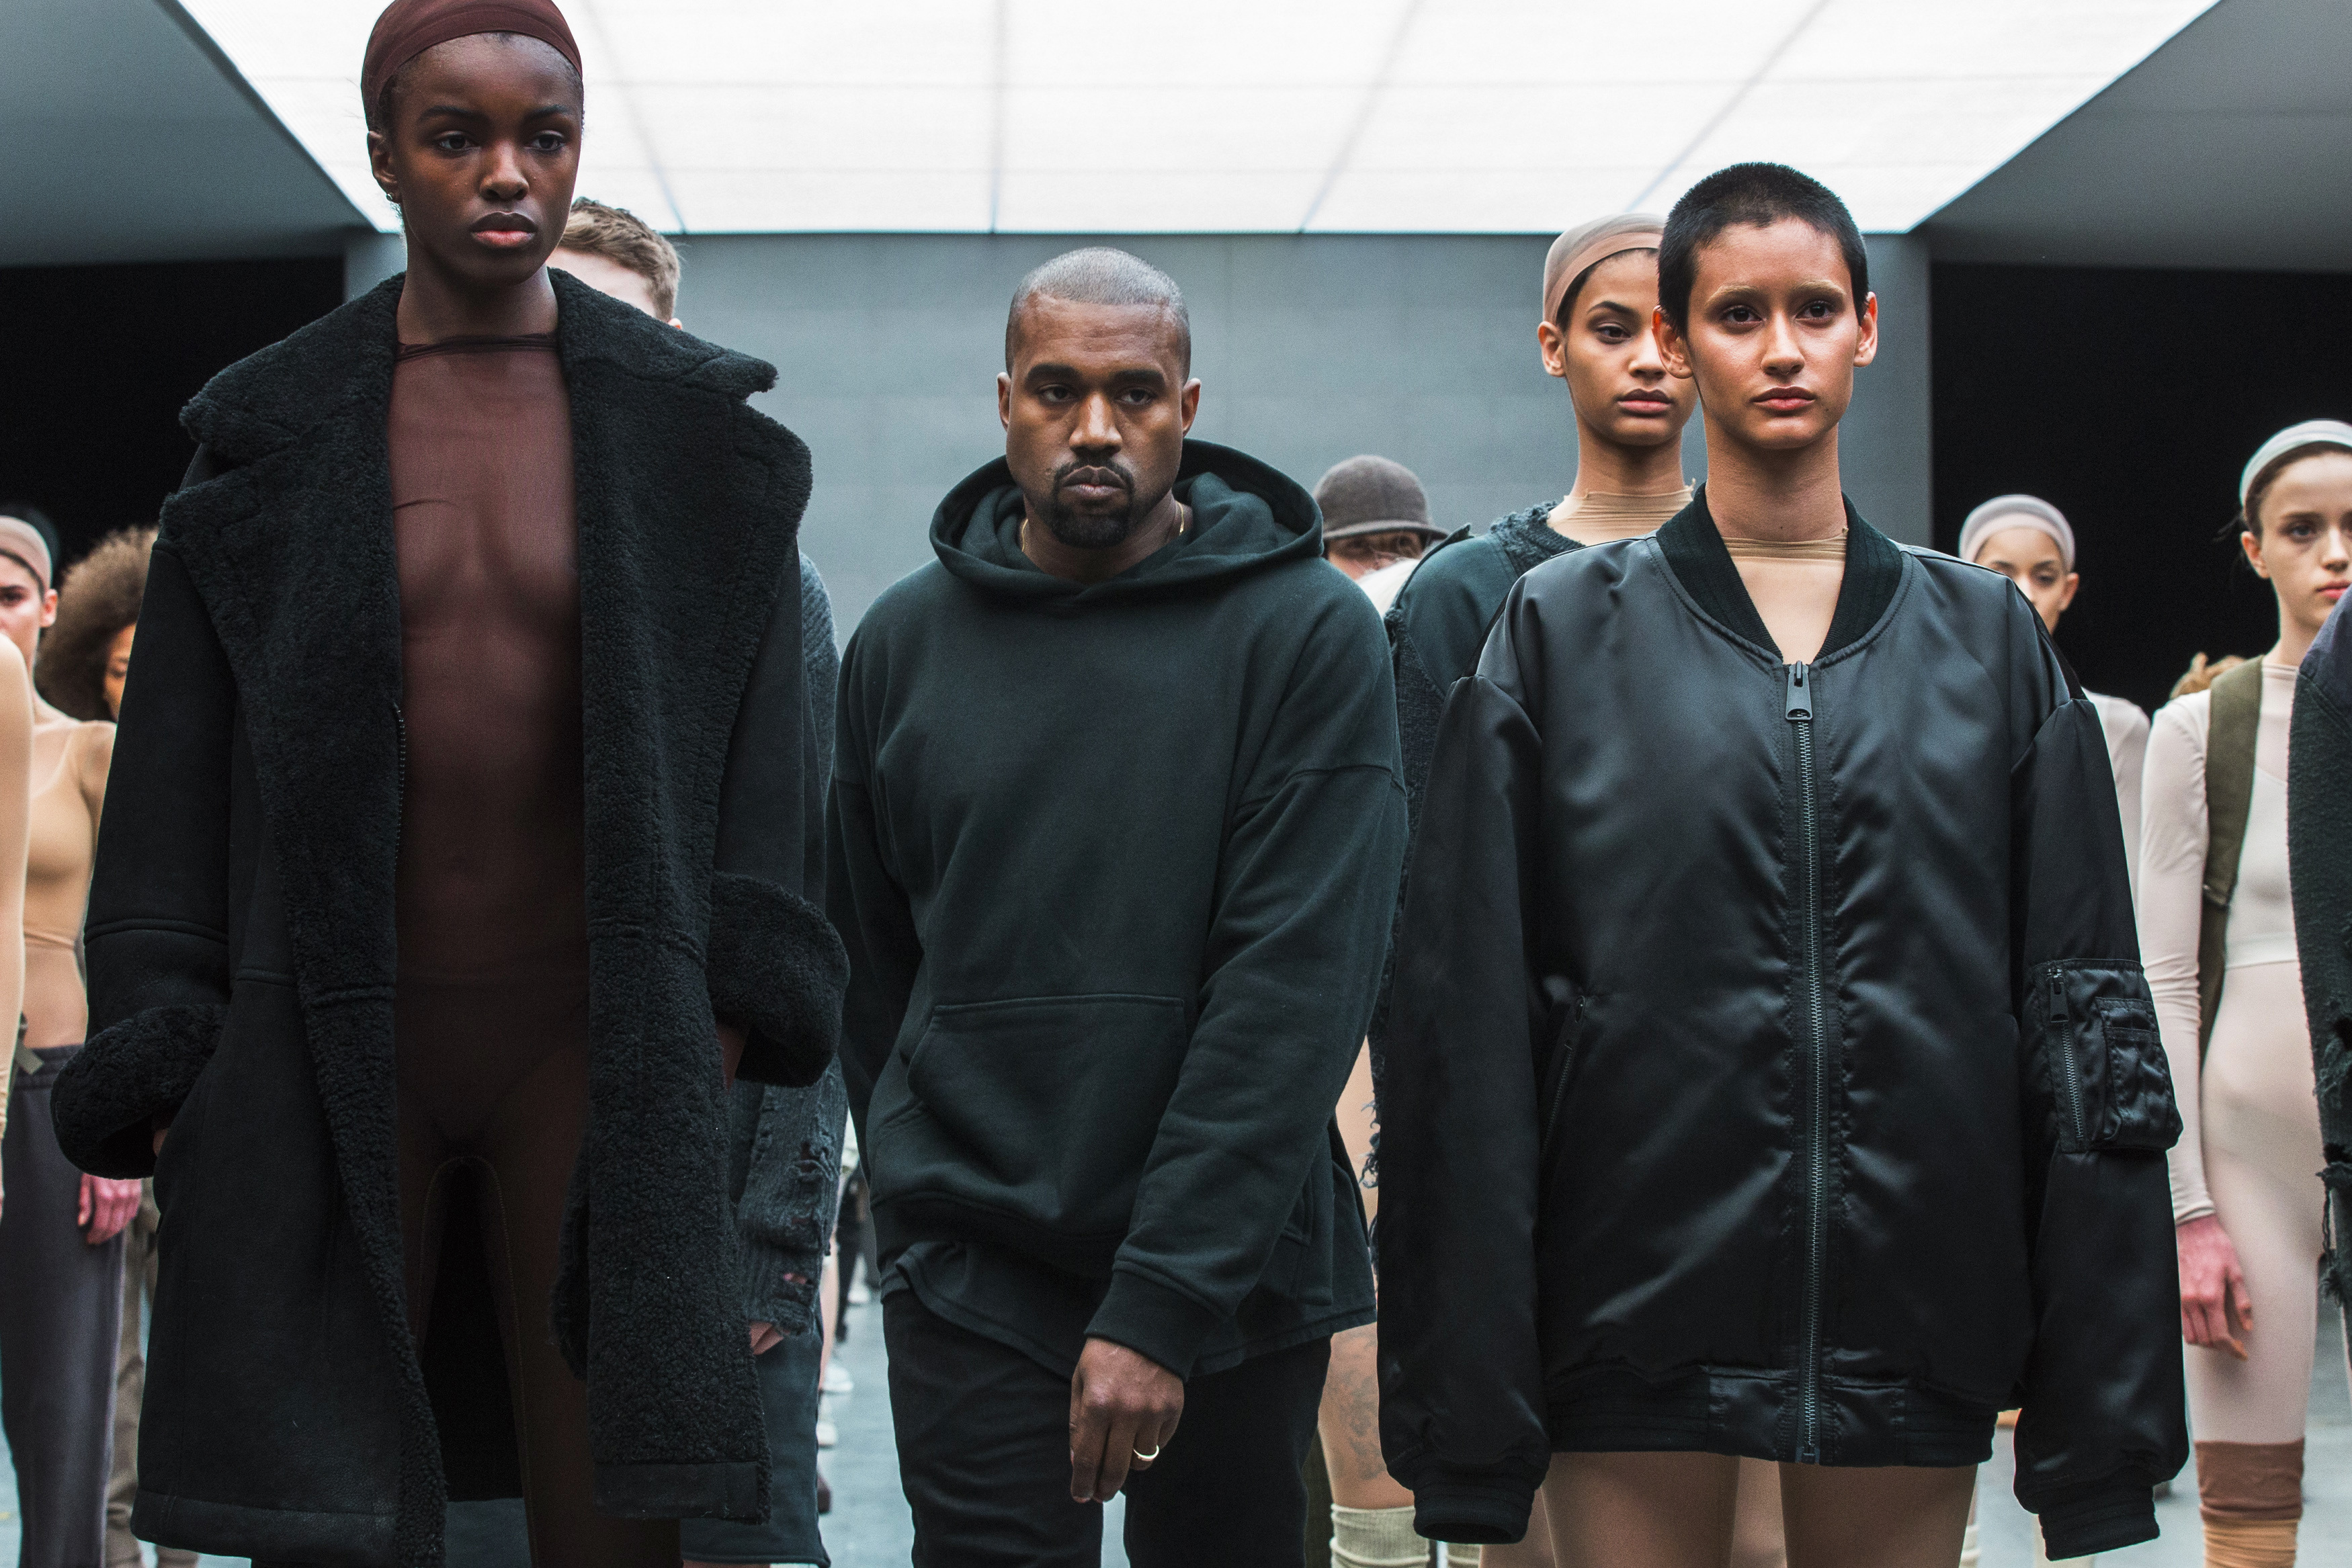 Singer Kanye West walks past models after presenting his Fall/Winter 2015 partnership line with Adidas 